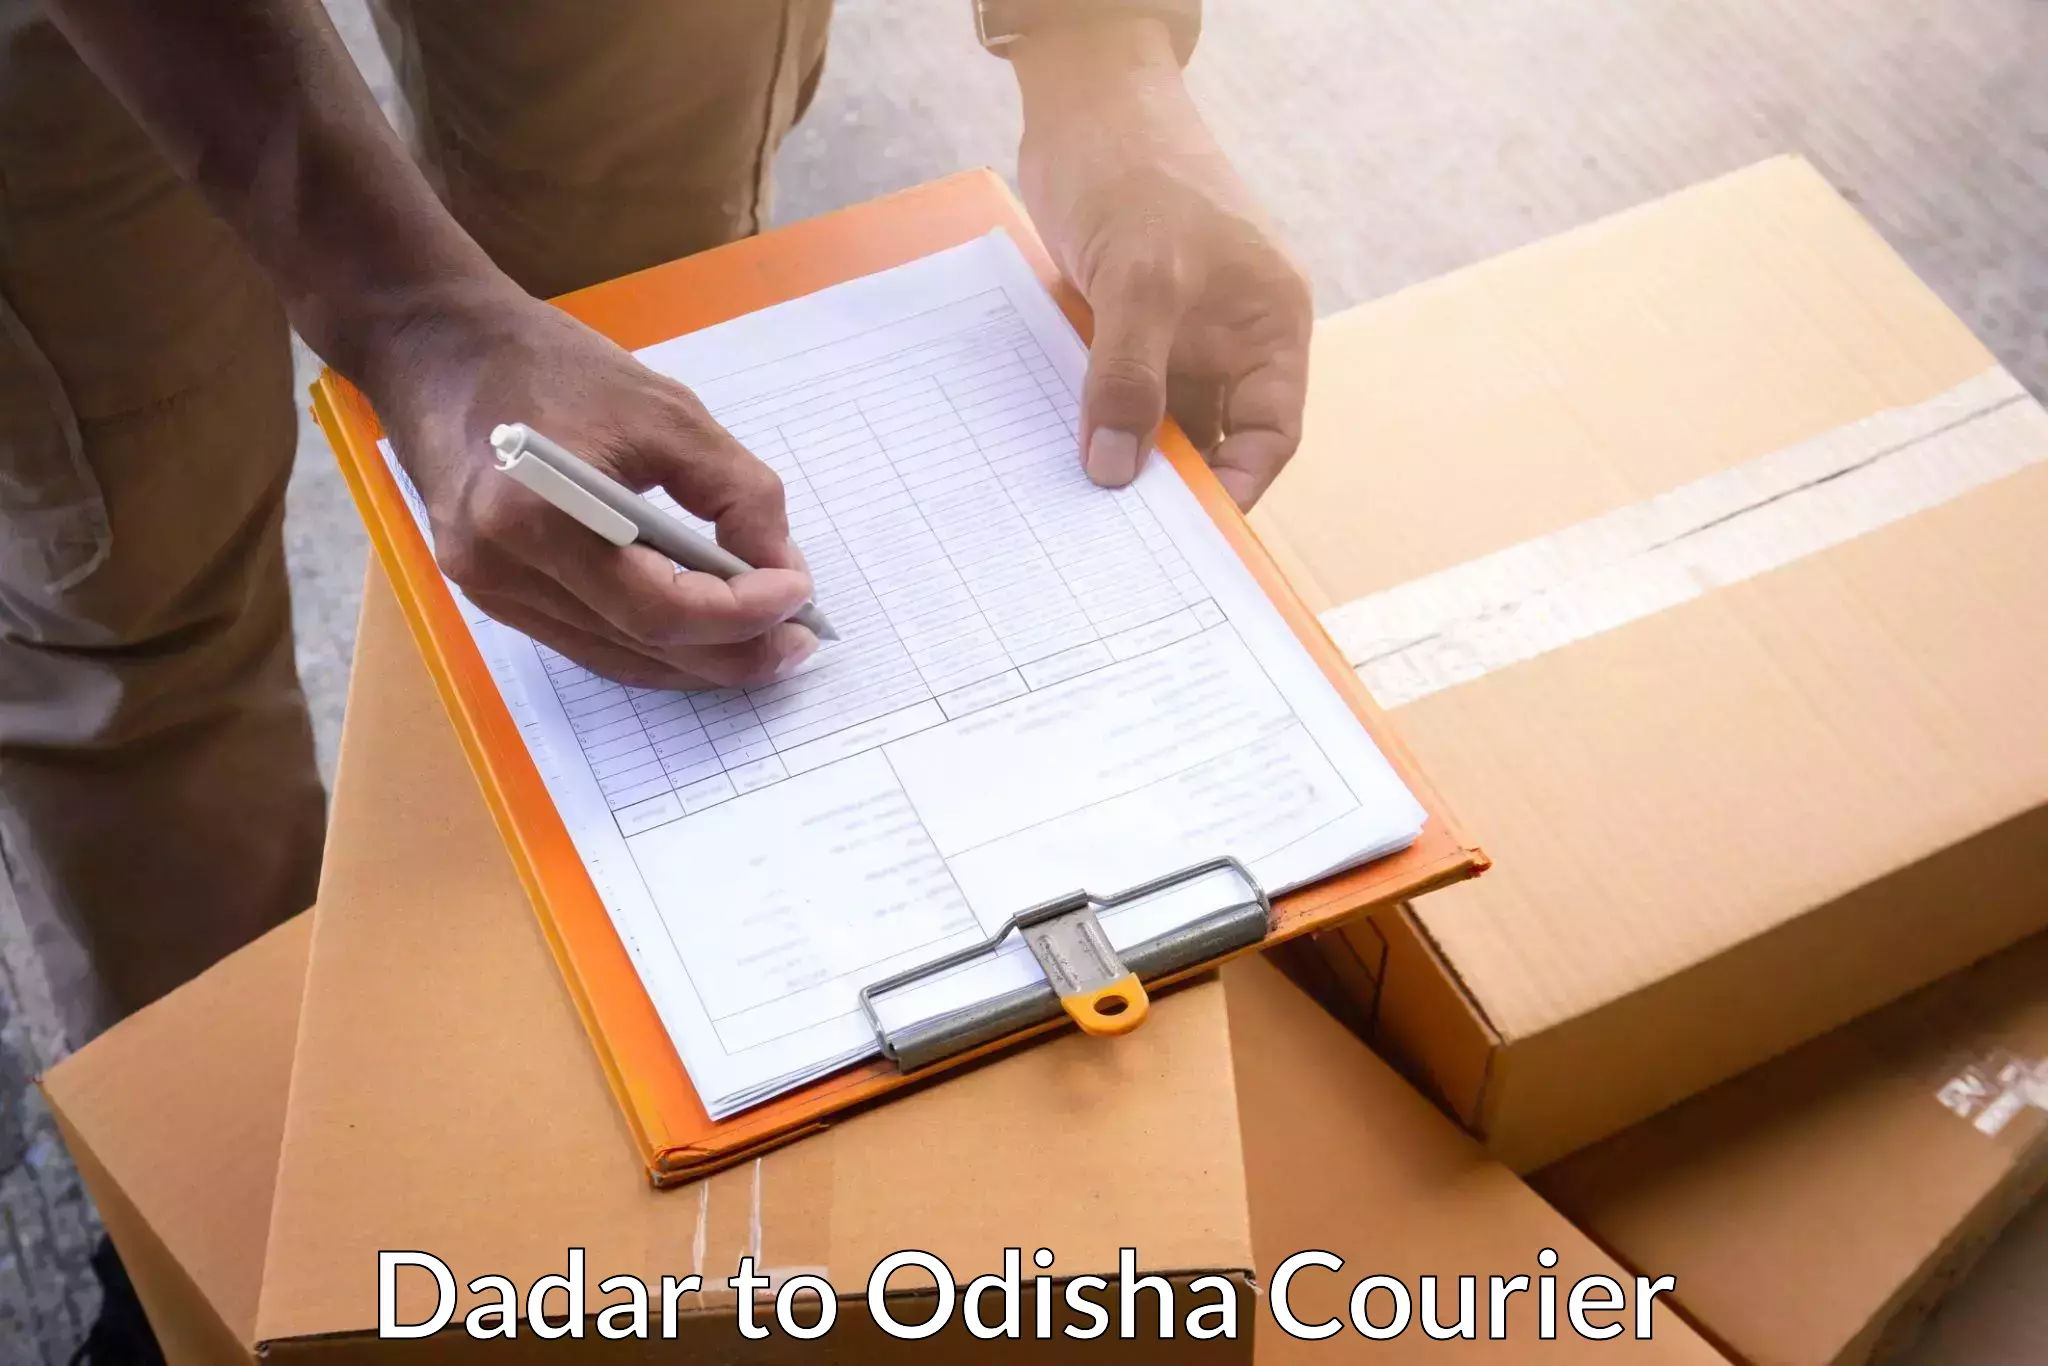 Customer-focused courier Dadar to Aul